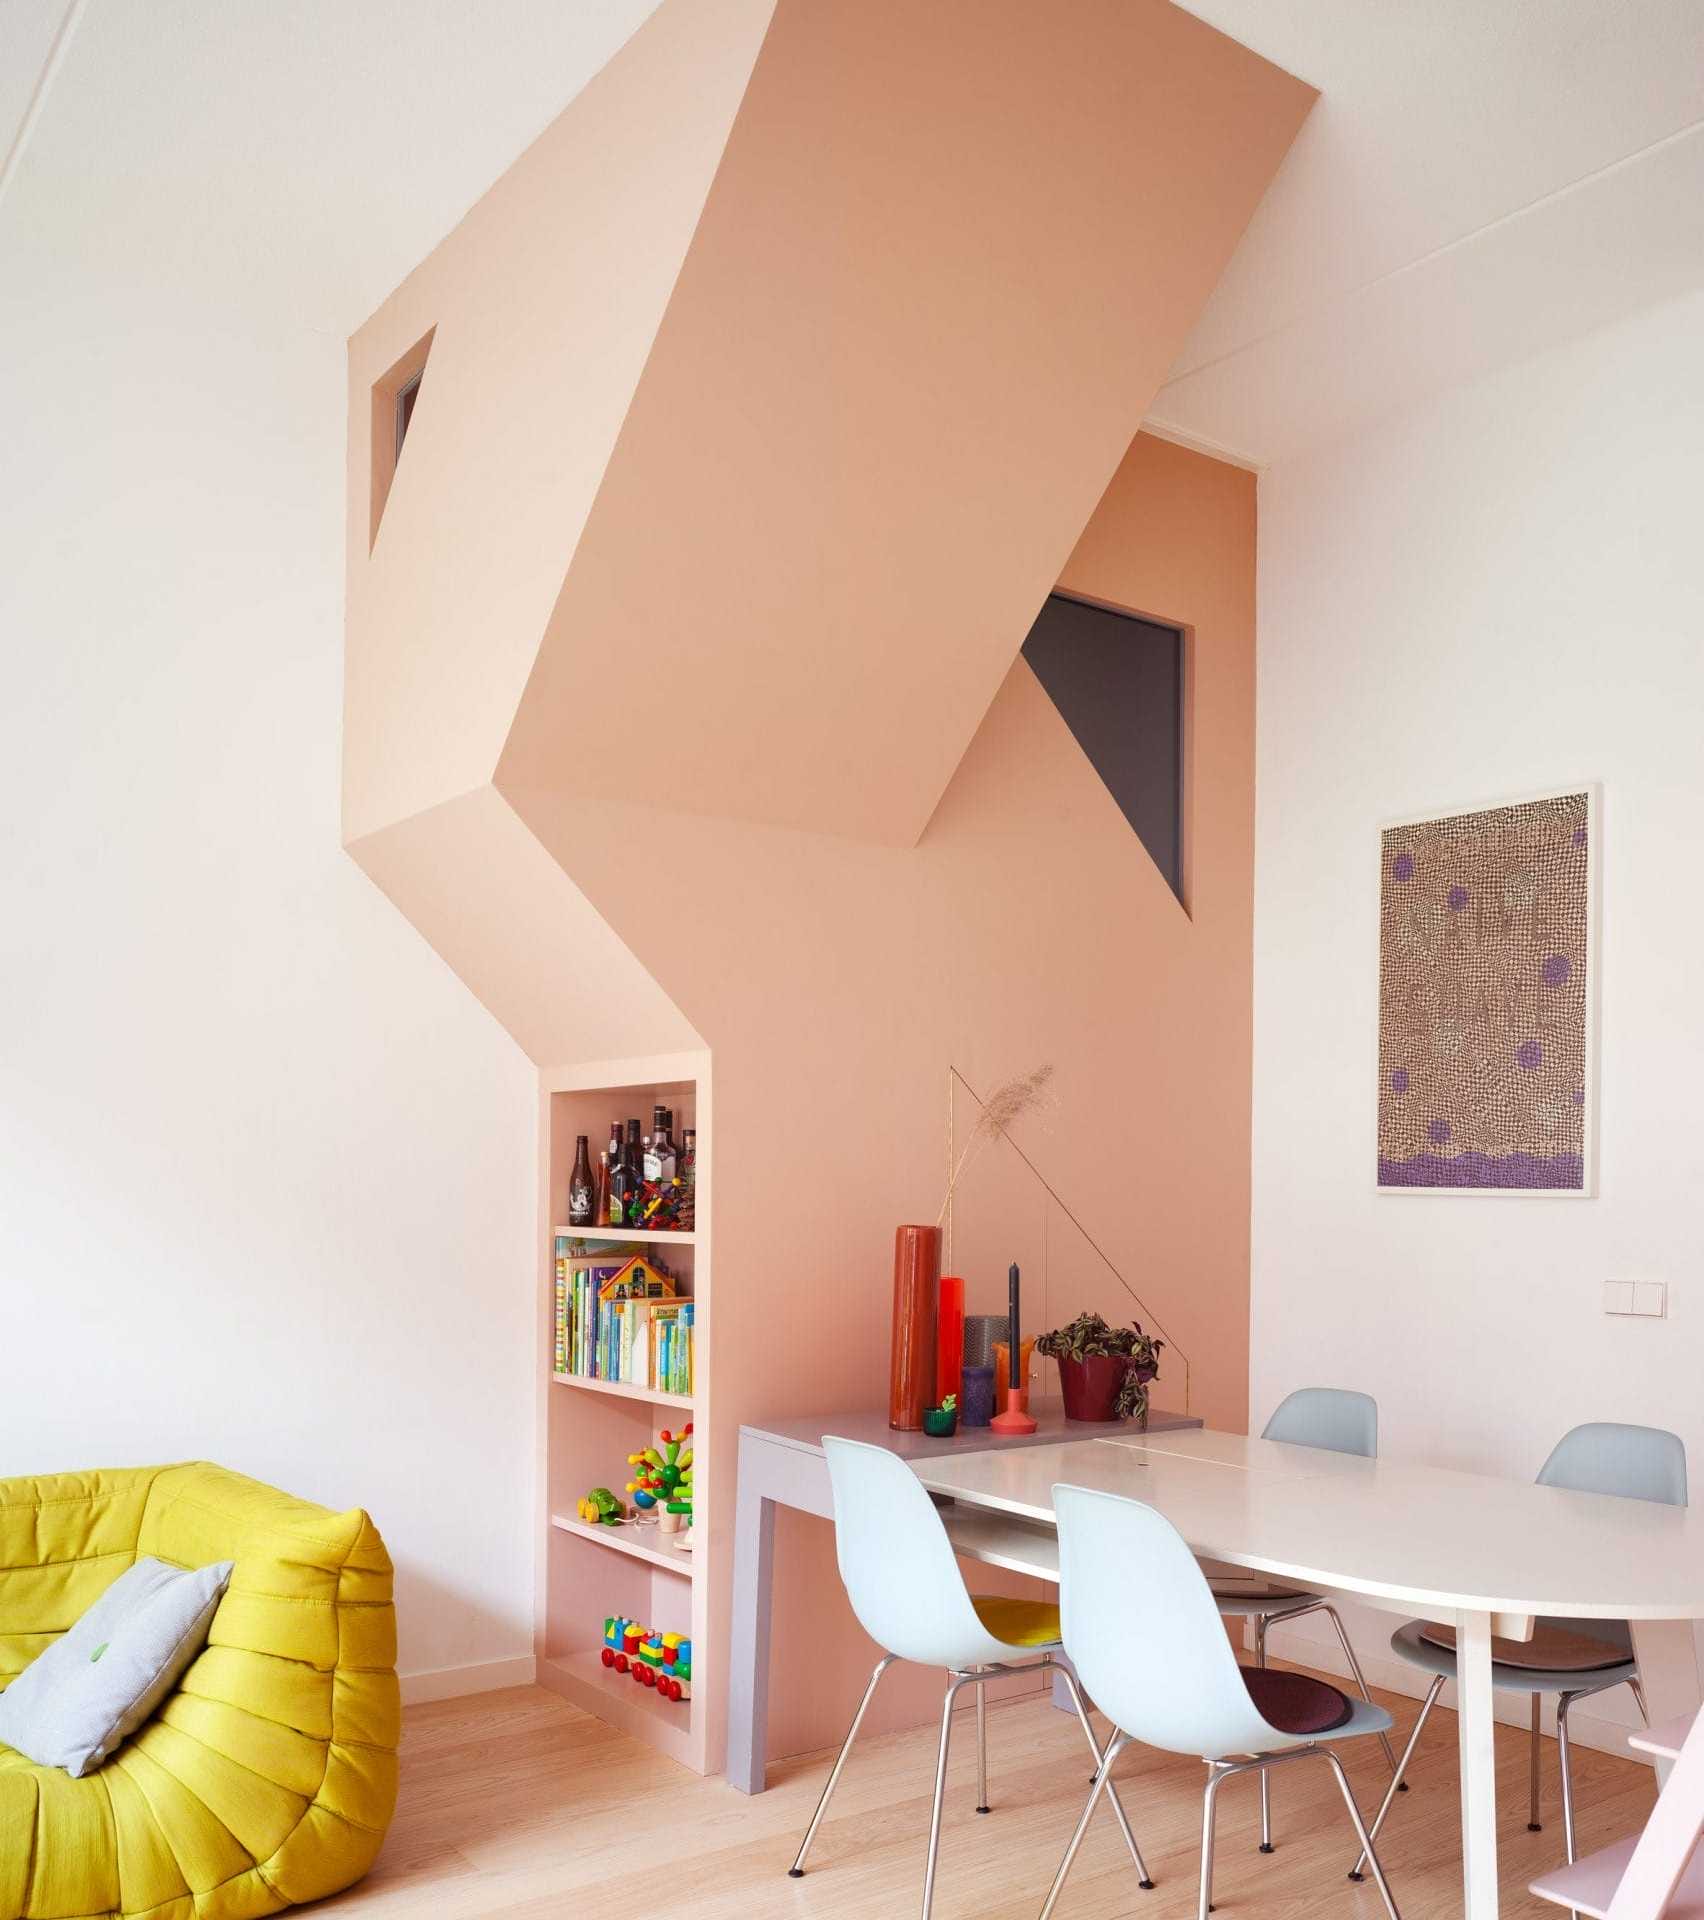 workhome-playhome-house_designalive-4